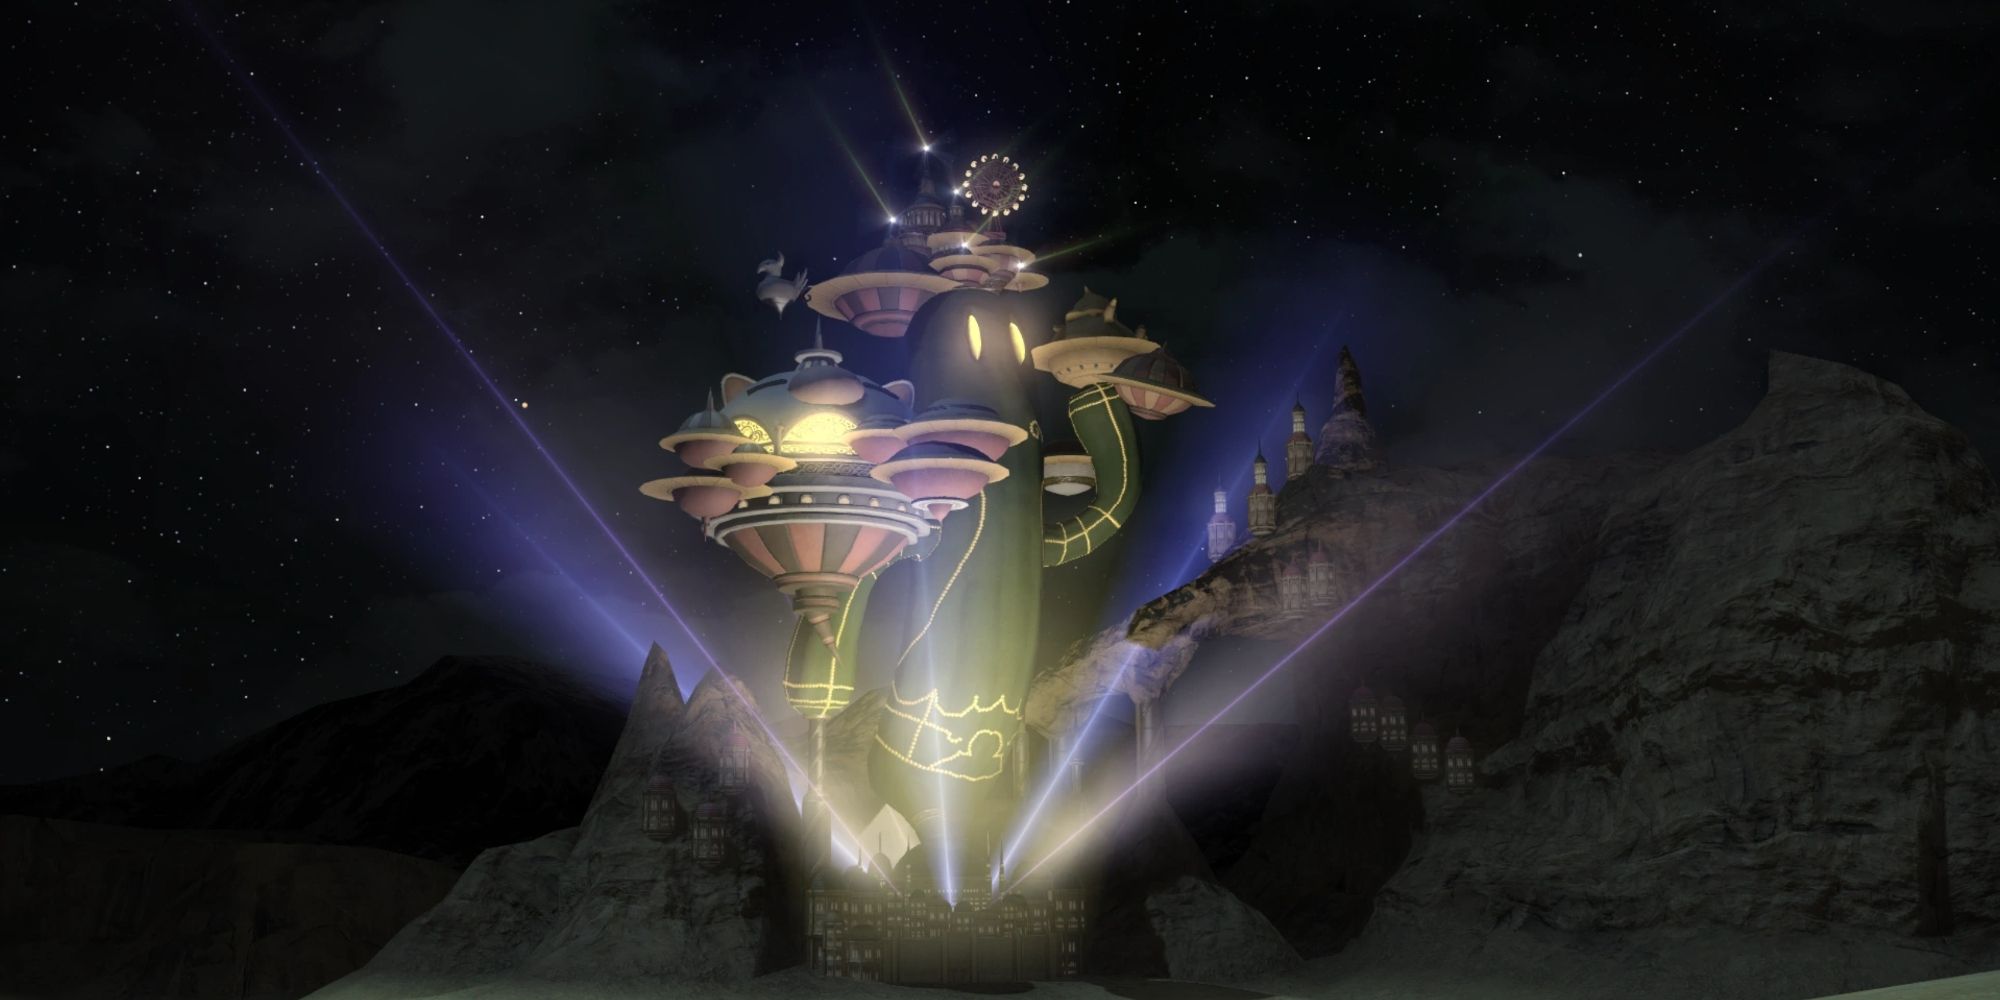 Manderville Golden Saucer in Final Fantasy 14, a large cactuar structure, balancing plates on its arms and head with bright lights shining on them.